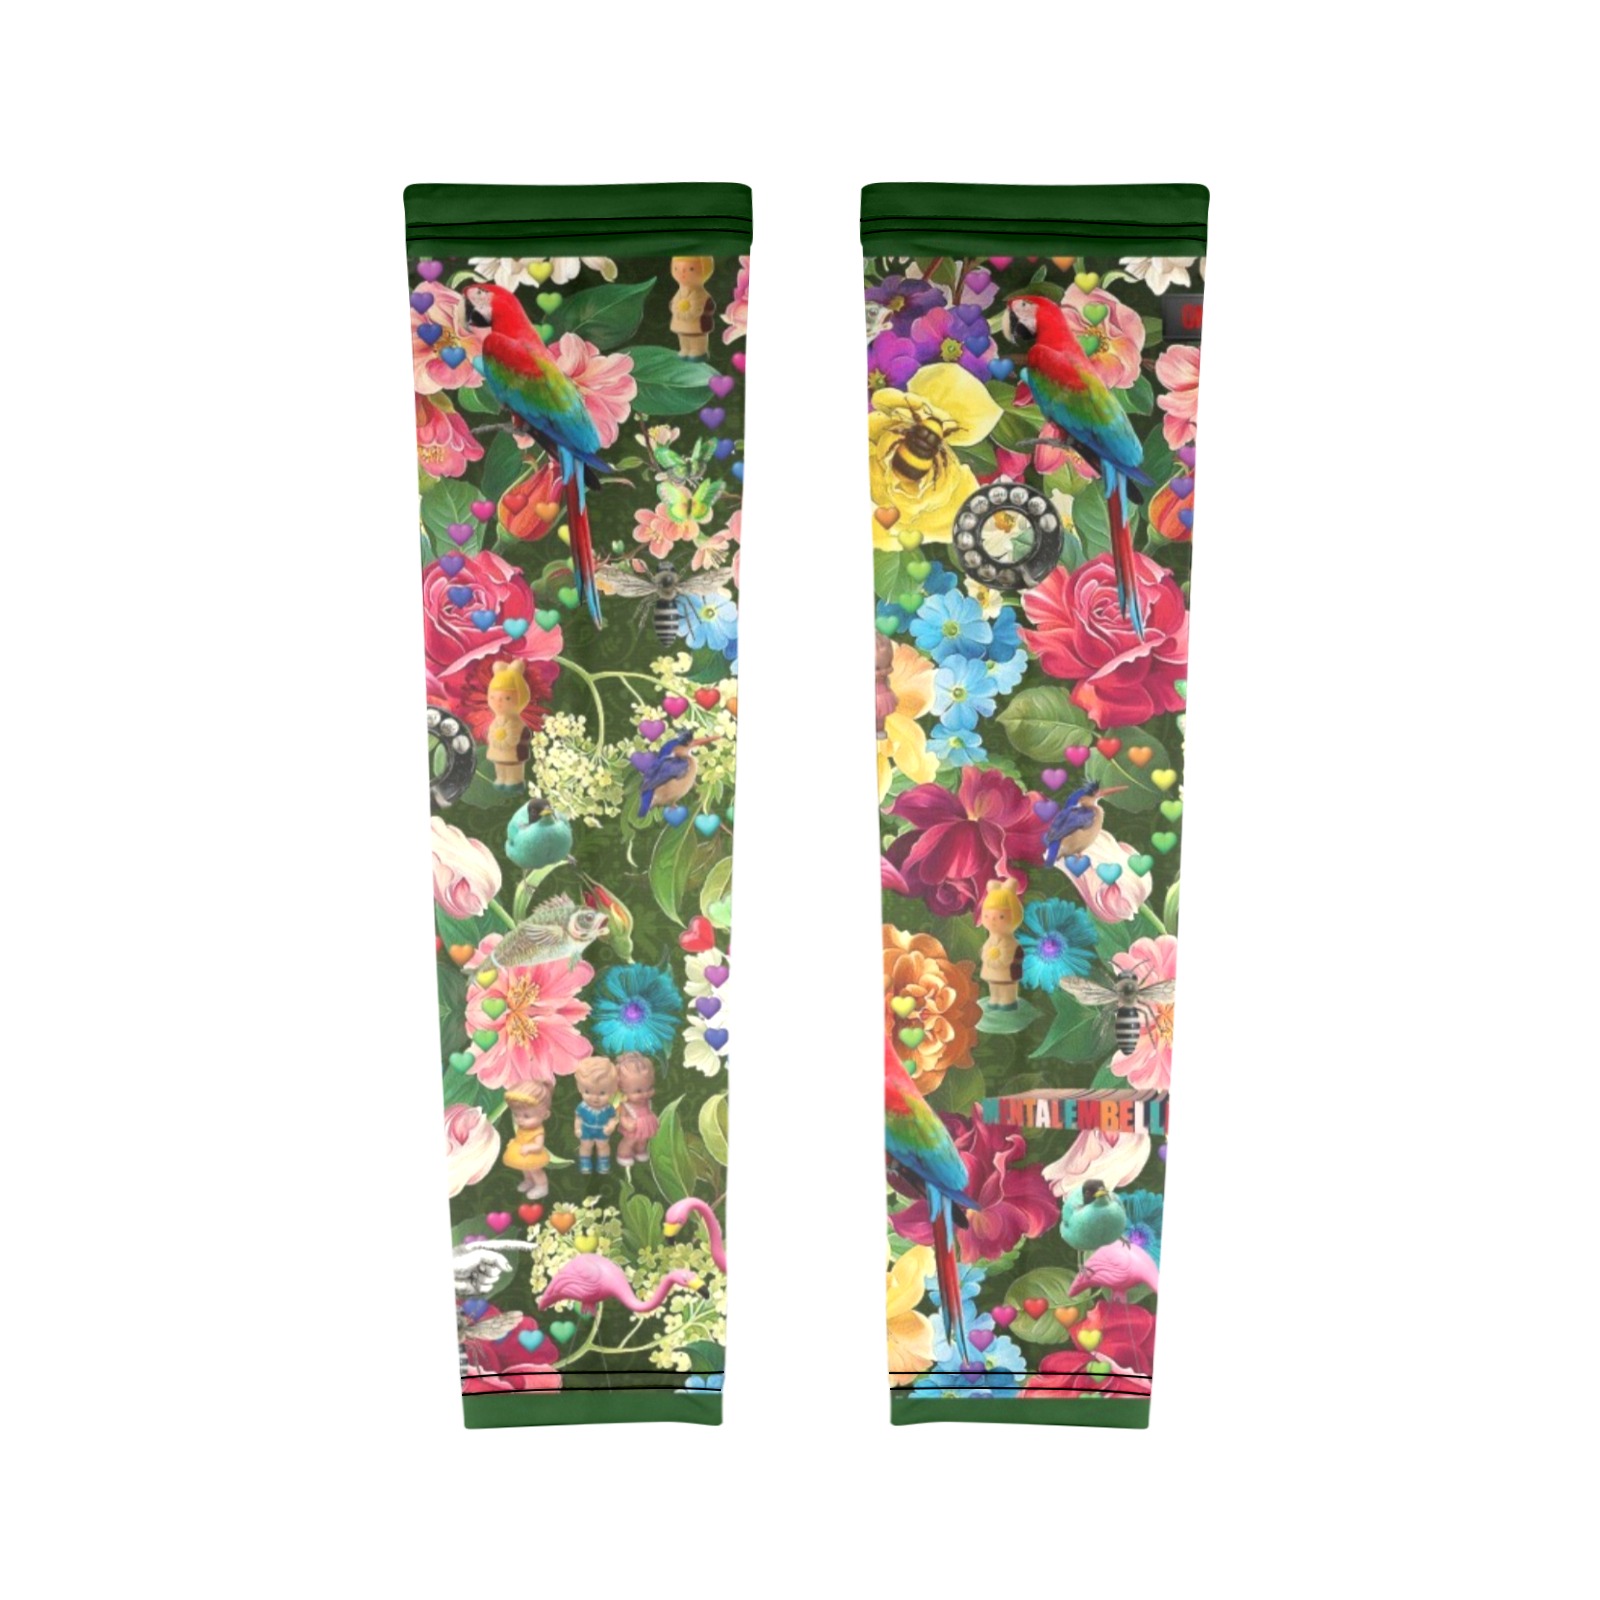 Is It Springtime Yet Arm Sleeves (Set of Two with Different Printings)